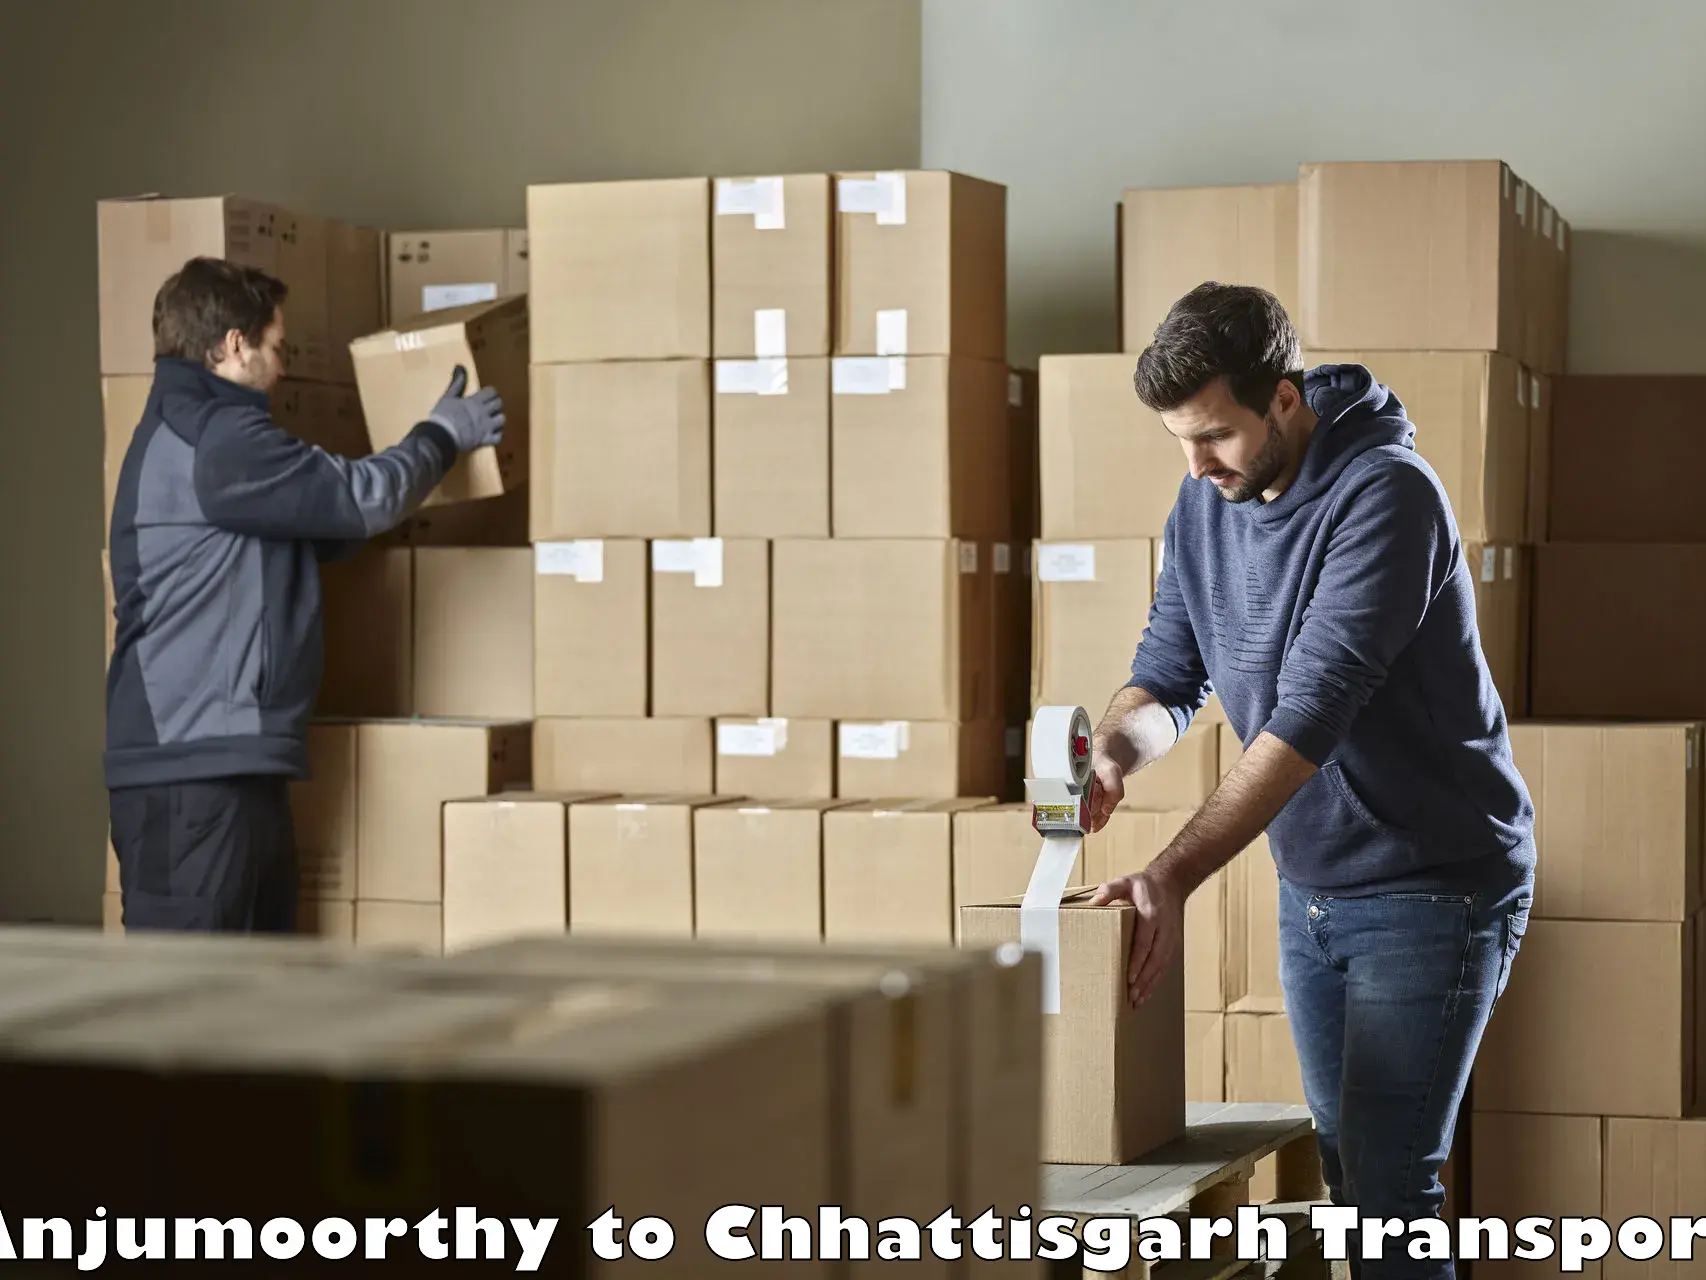 Domestic goods transportation services in Anjumoorthy to Mandhar